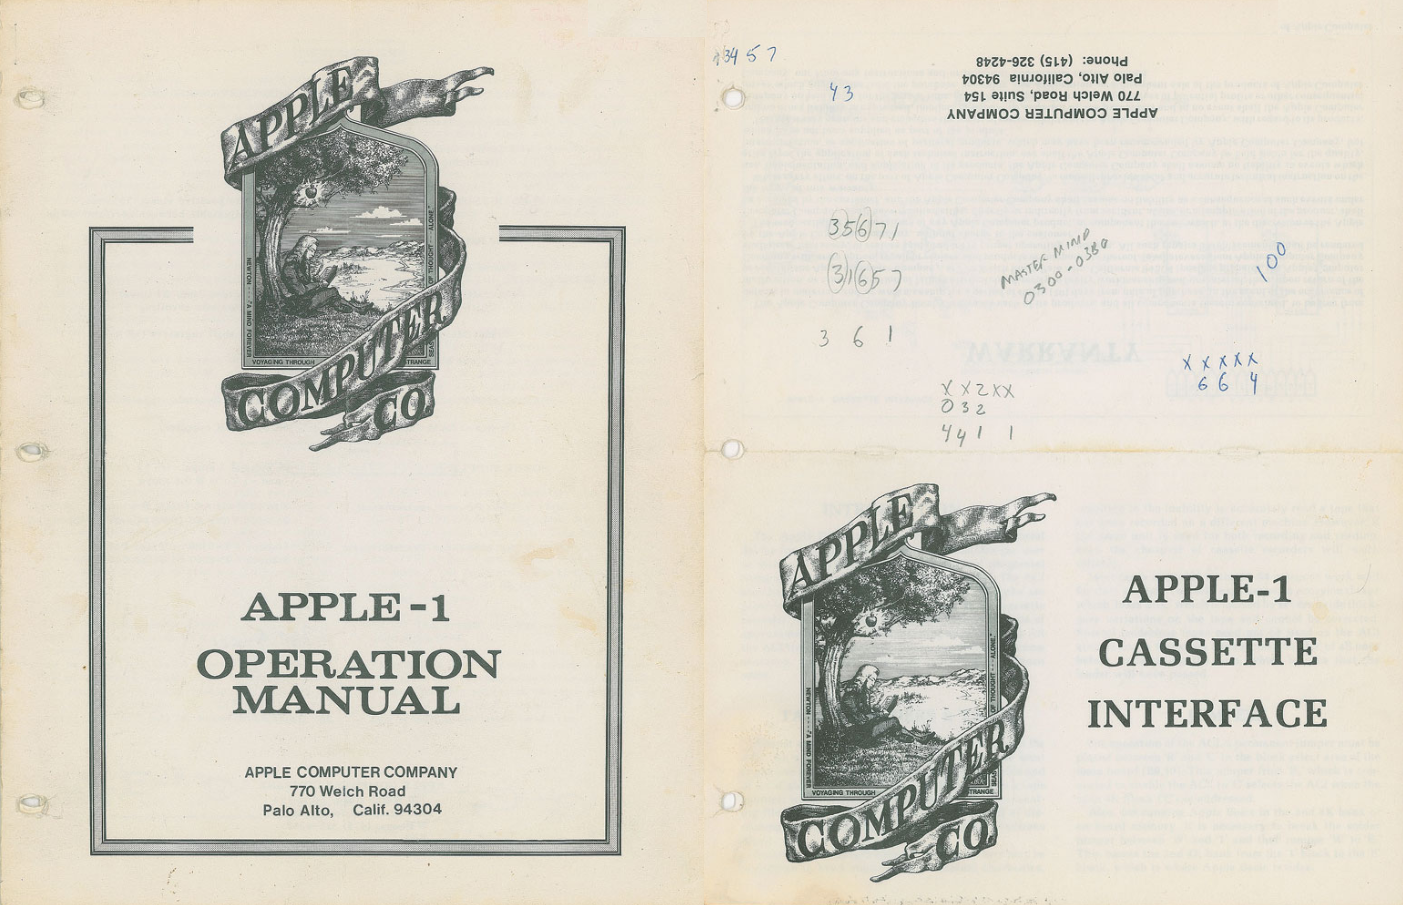 The lot includes the Apple-1 user manual and a guide for the cassette interface - Apple-1 in working condition up for bid in auction; price expected to hit over $300,000